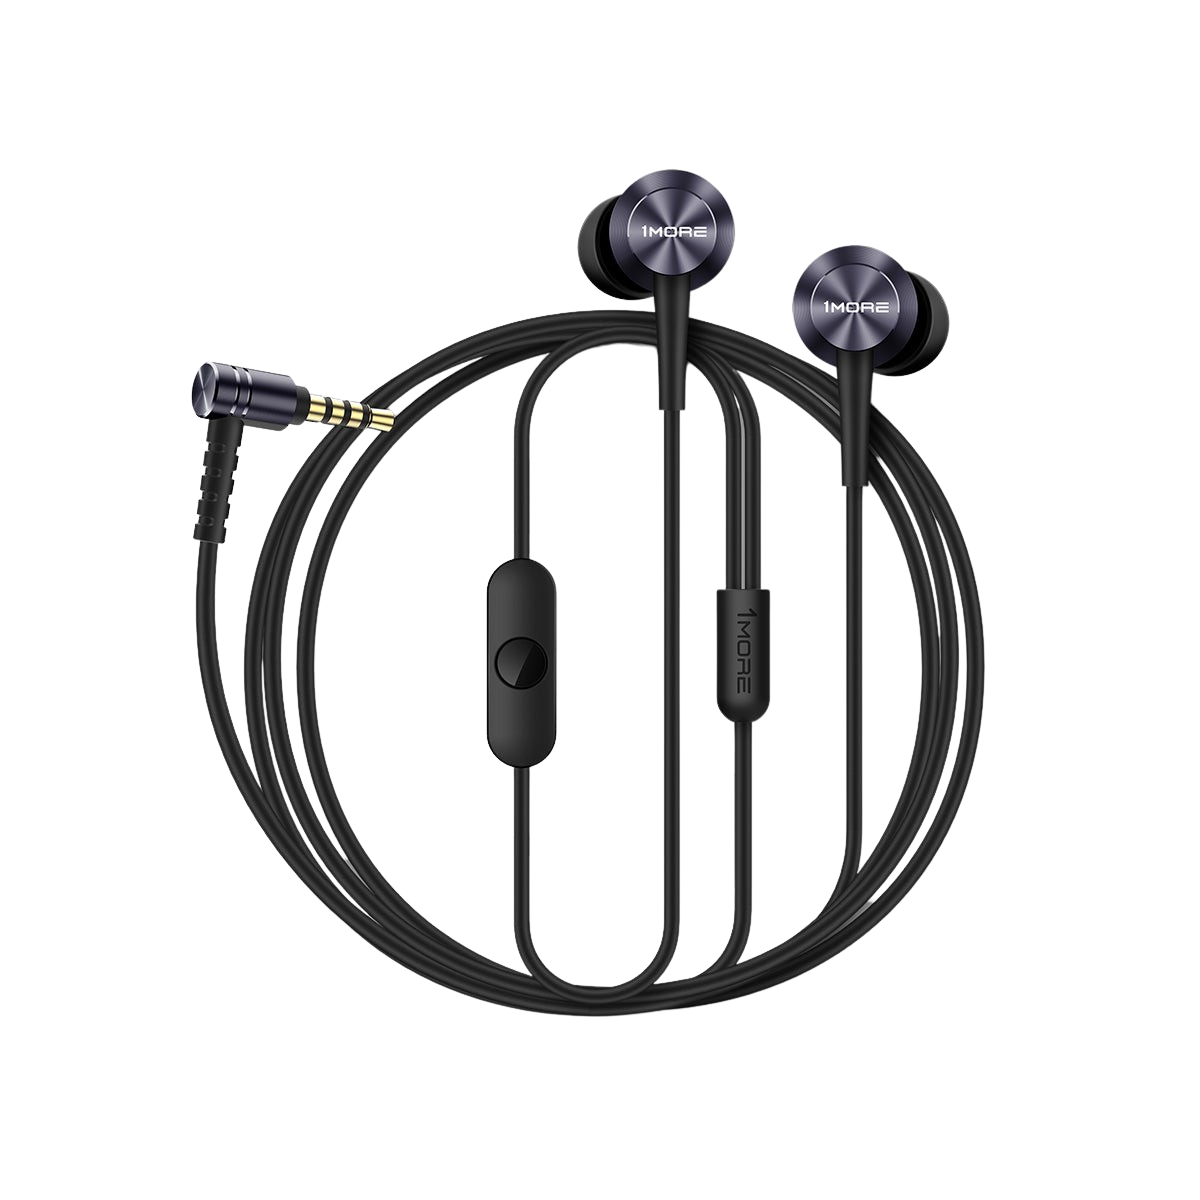 1MORE Piston Fit Wired Earphone With Mic